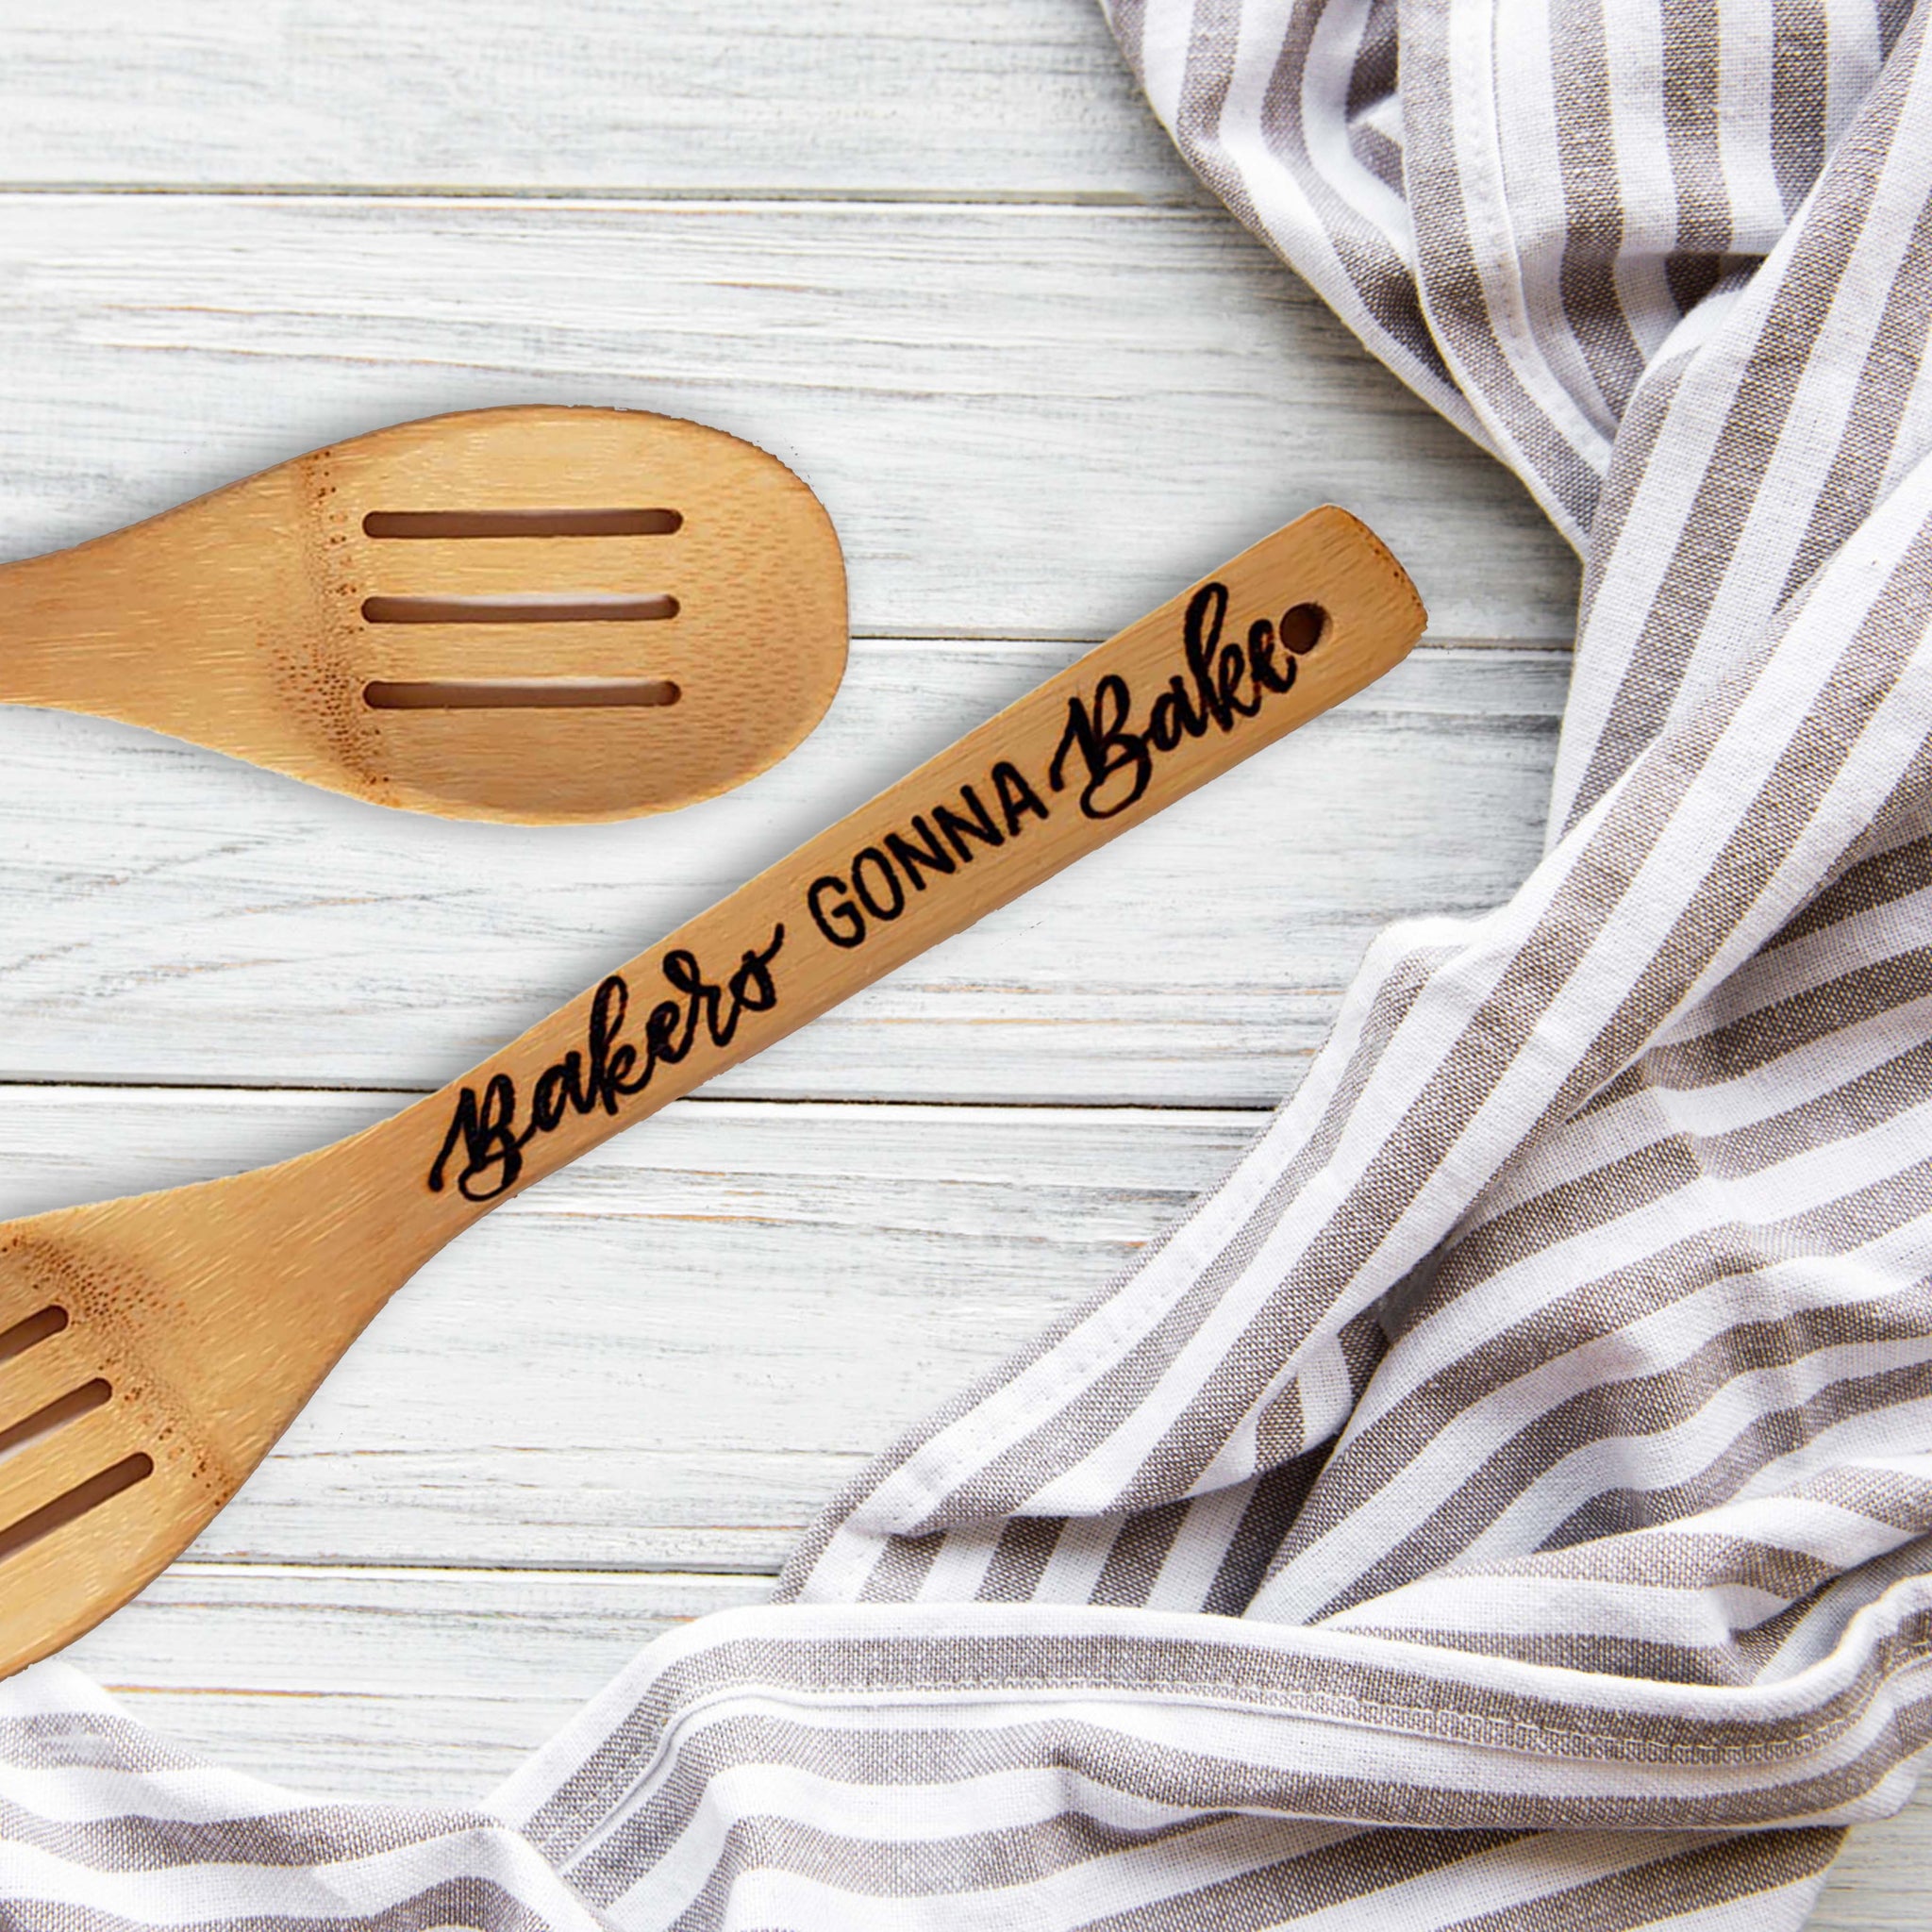 Bamboo wooden slotted spoon wood burned hand lettering that says Bakers Gonna Bake laying on a table with a towel